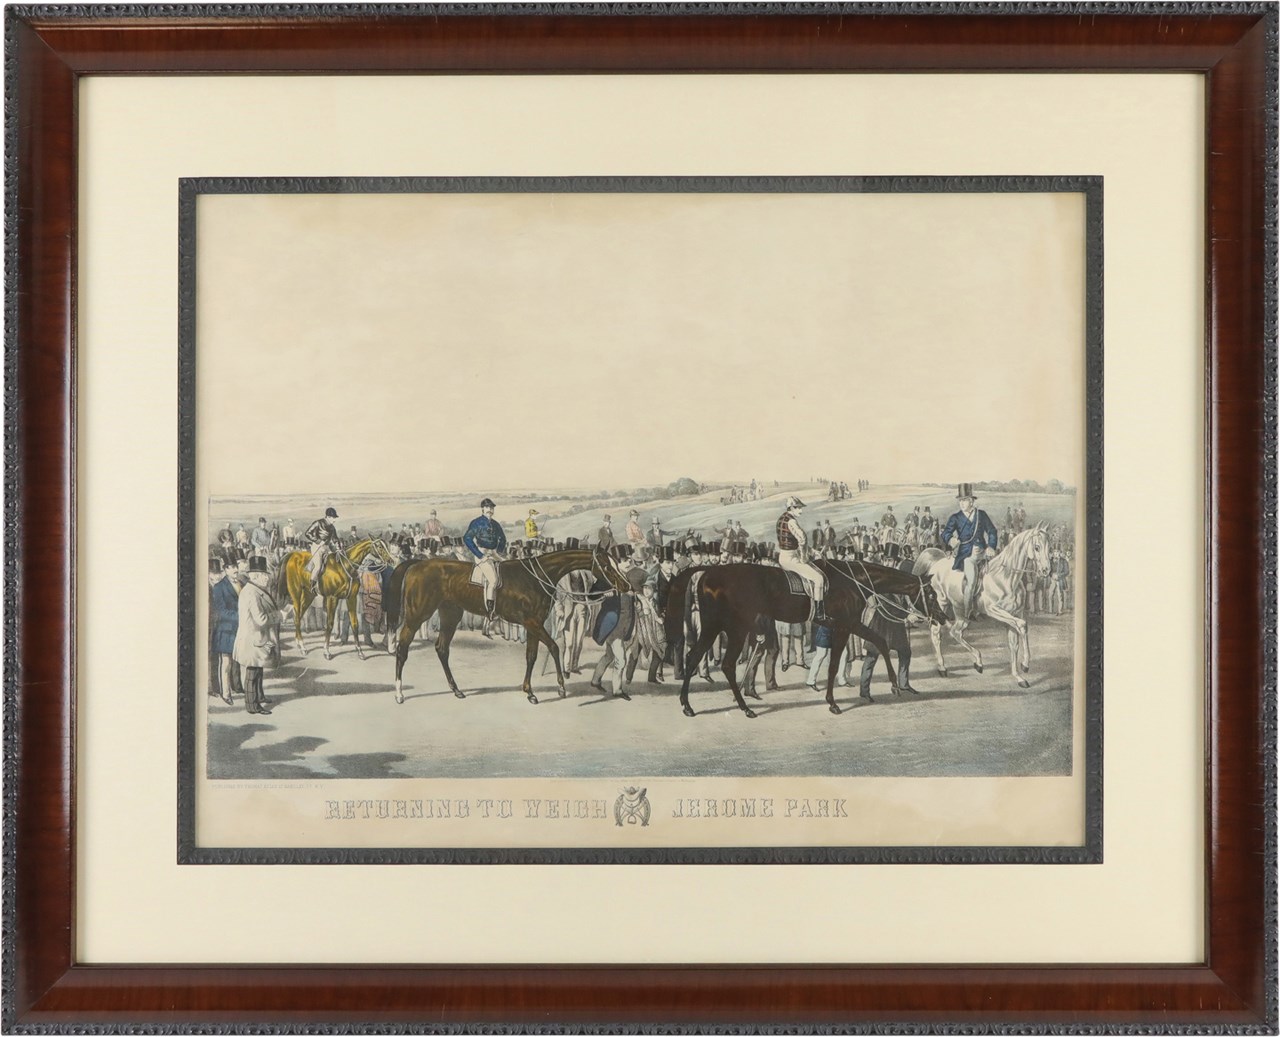 Gorgeous Framed Print “Returning to Weigh” By Thomas Kelly, 1870